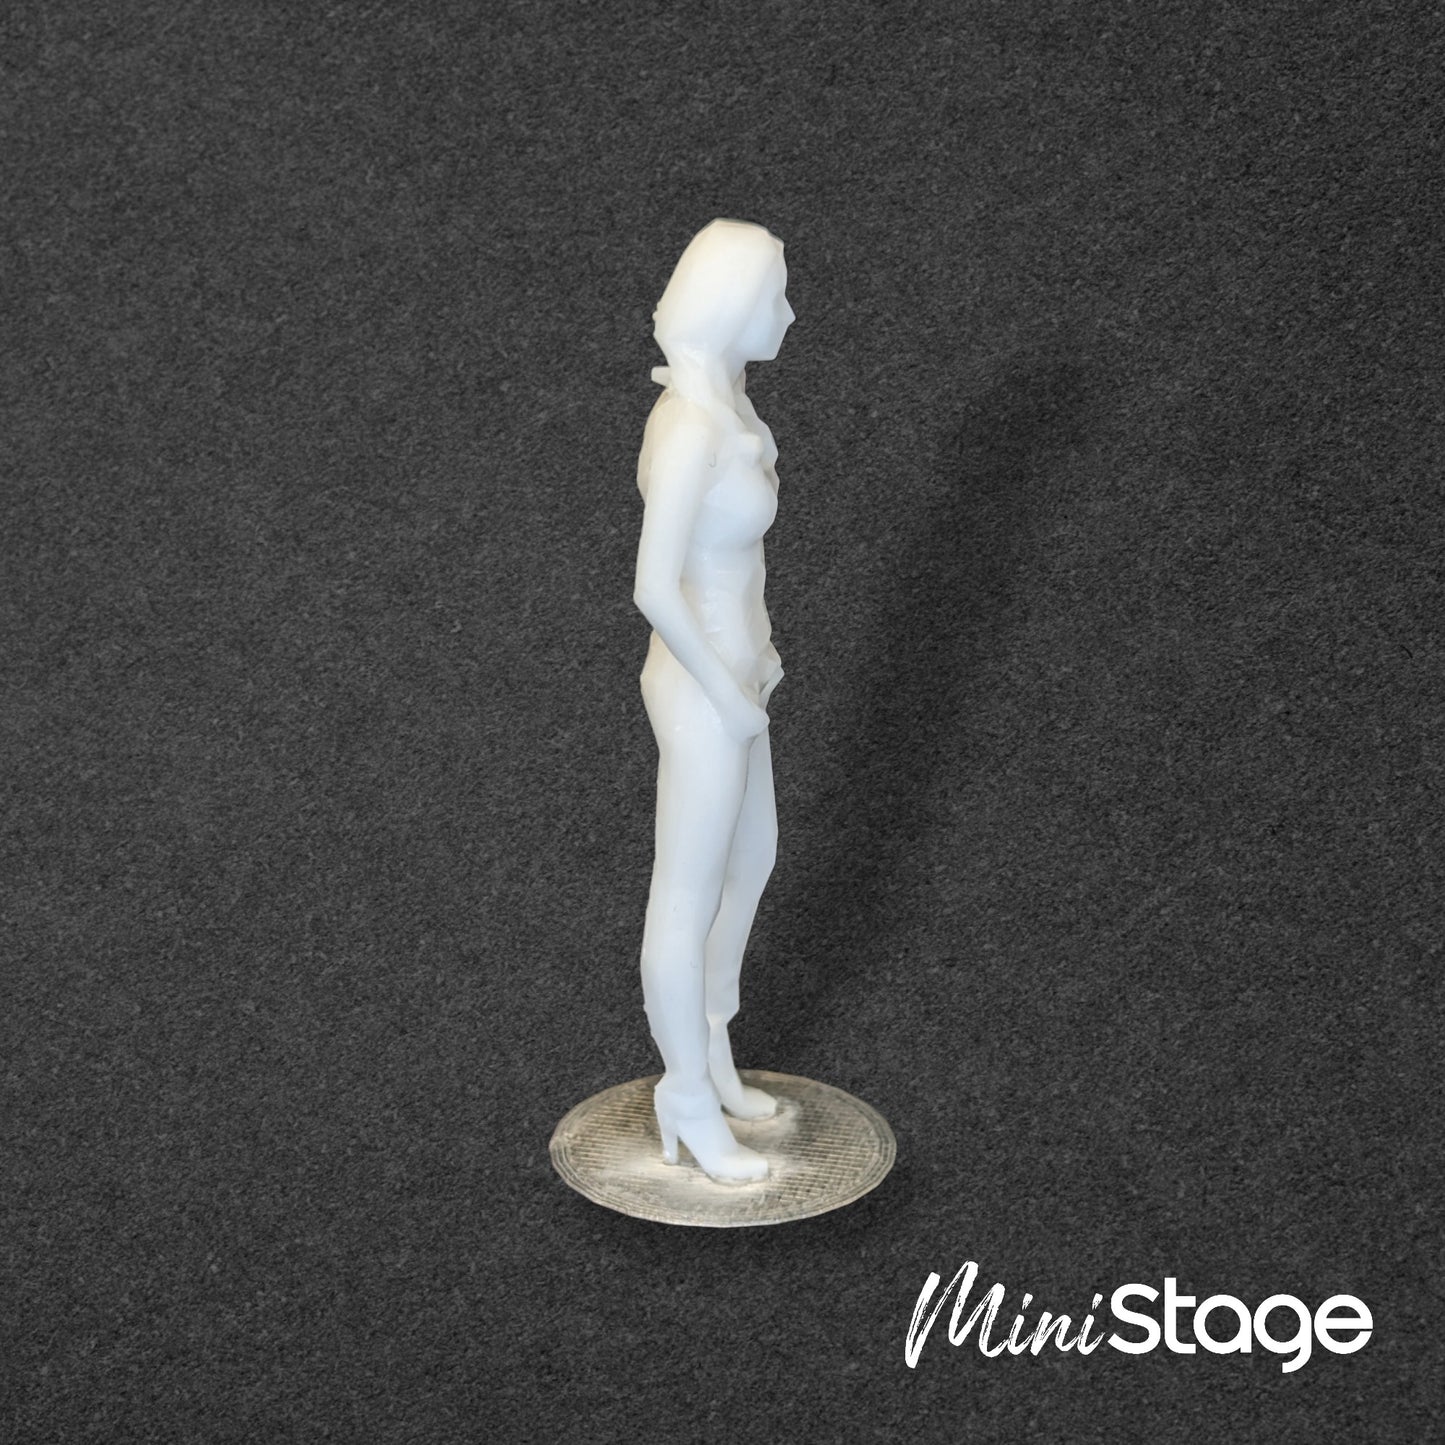 Alice - Scale Modelbox Unpainted Figure of Woman Standing with Hands in Pockets